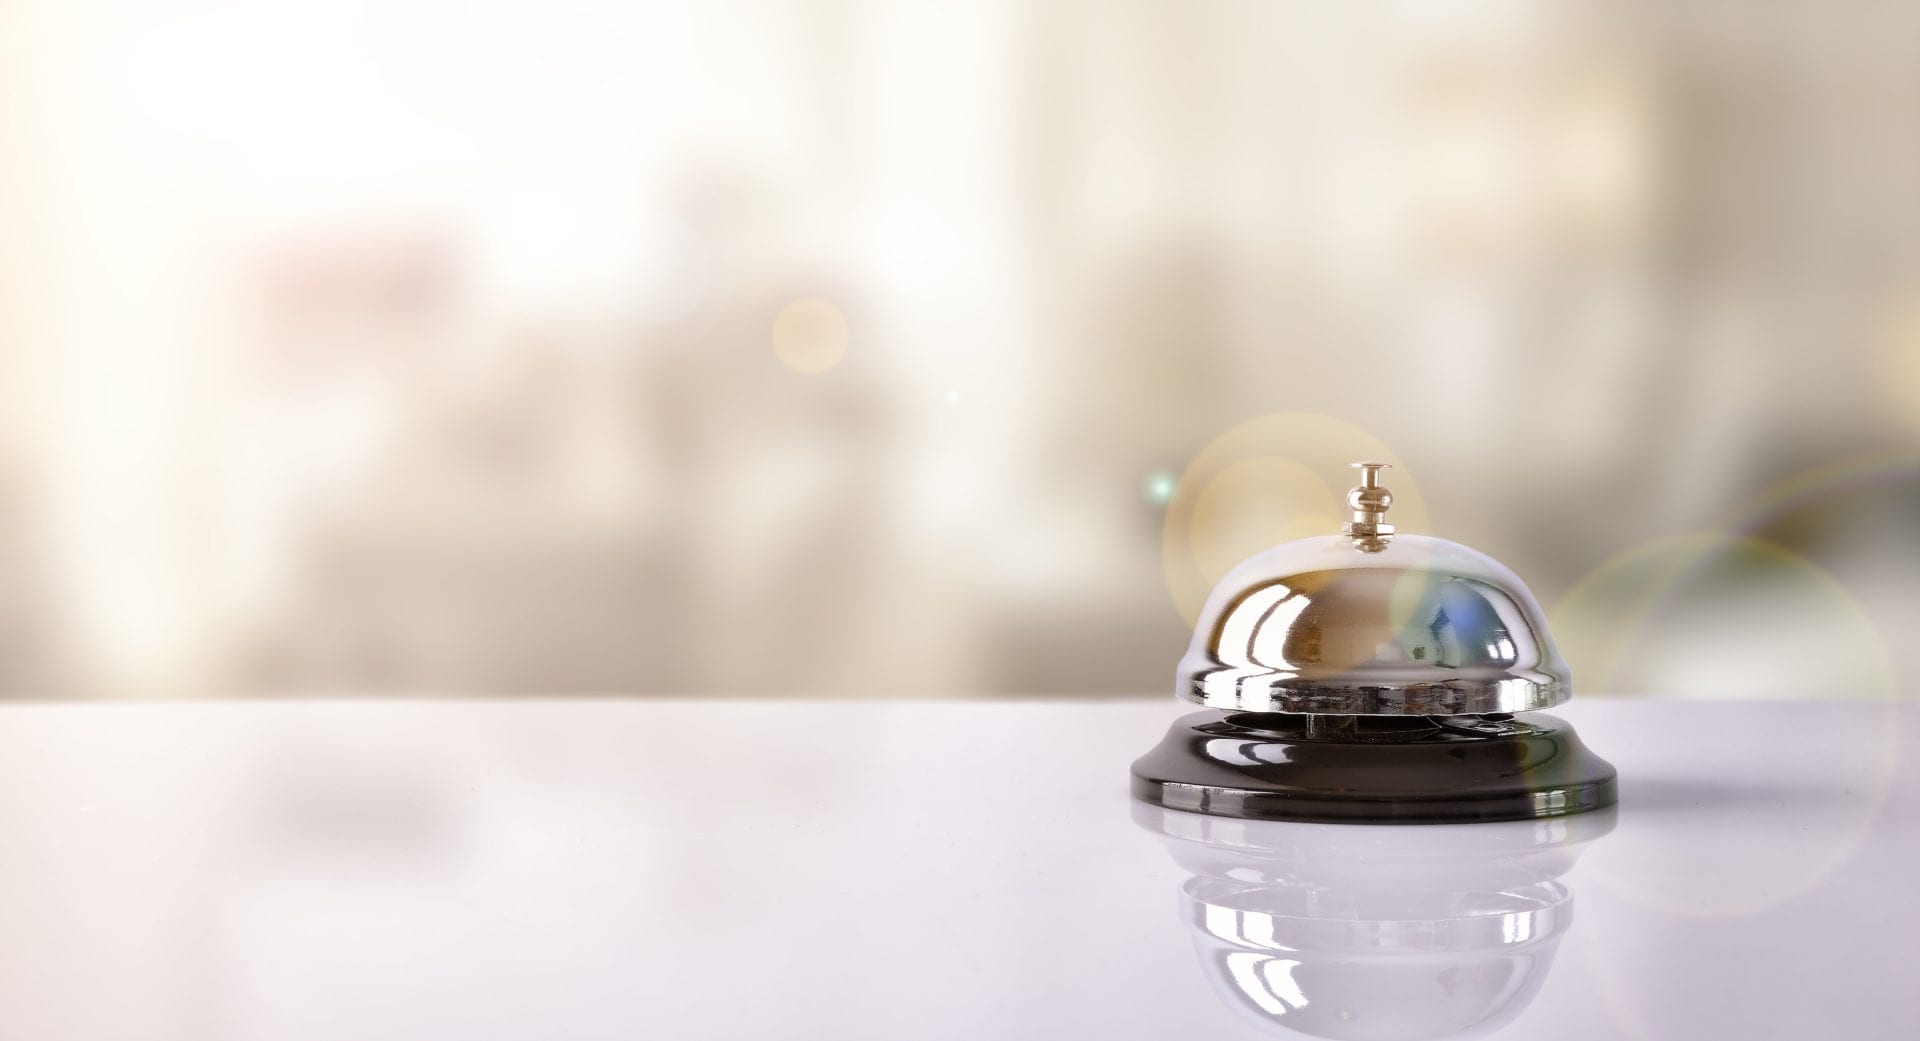 Hotel service bell on a table white glass and simulation hotel background. Concept hotel, travel, room